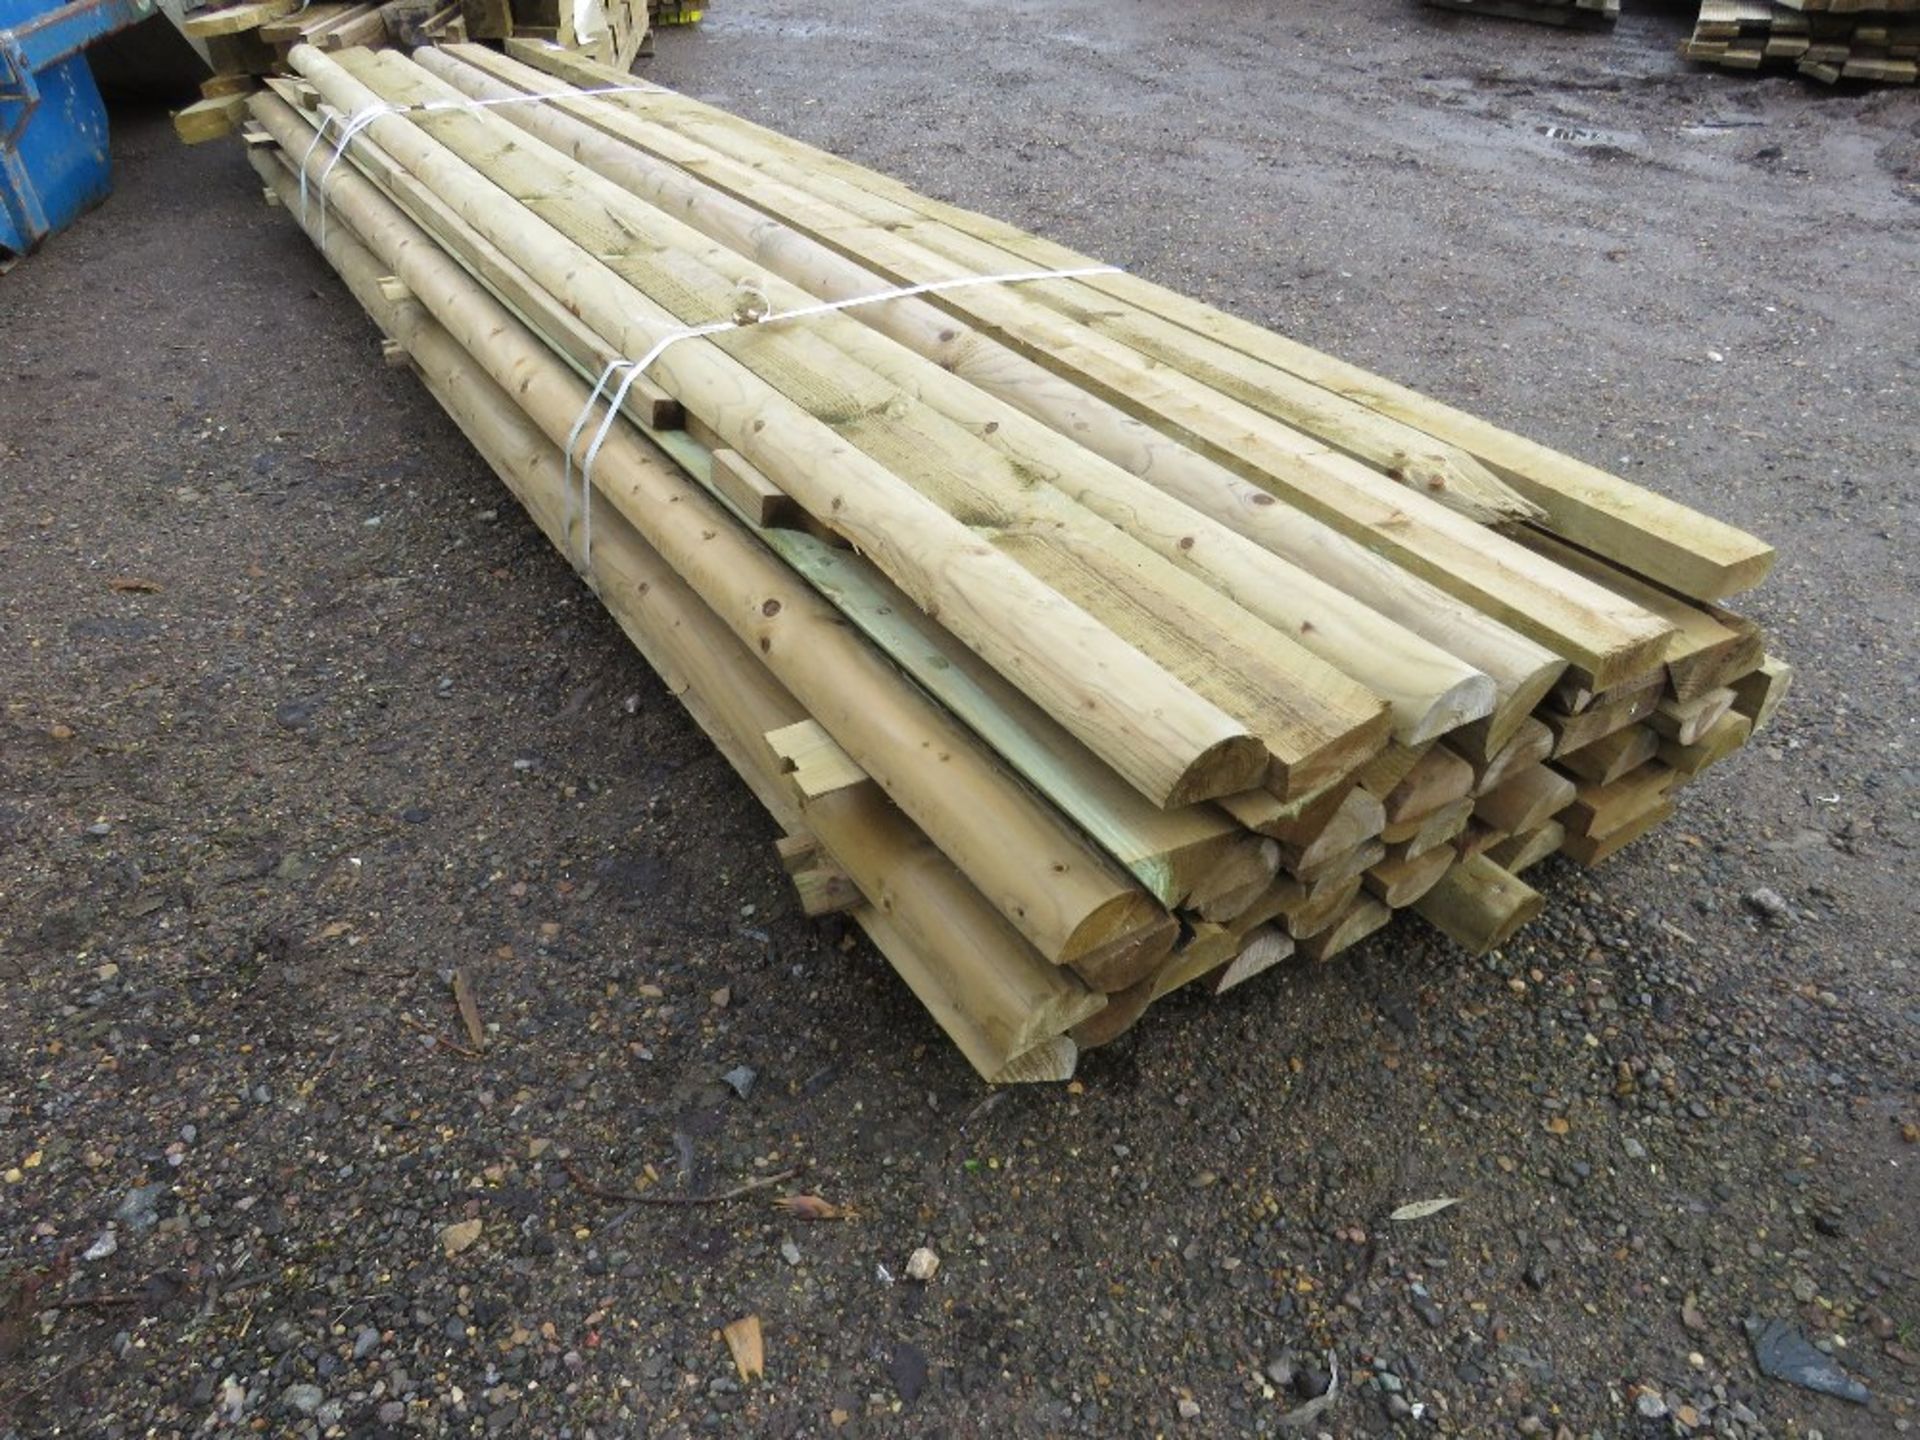 POSTS AND TIMBERS, MAINLY 12FT LENGTH APPROX.